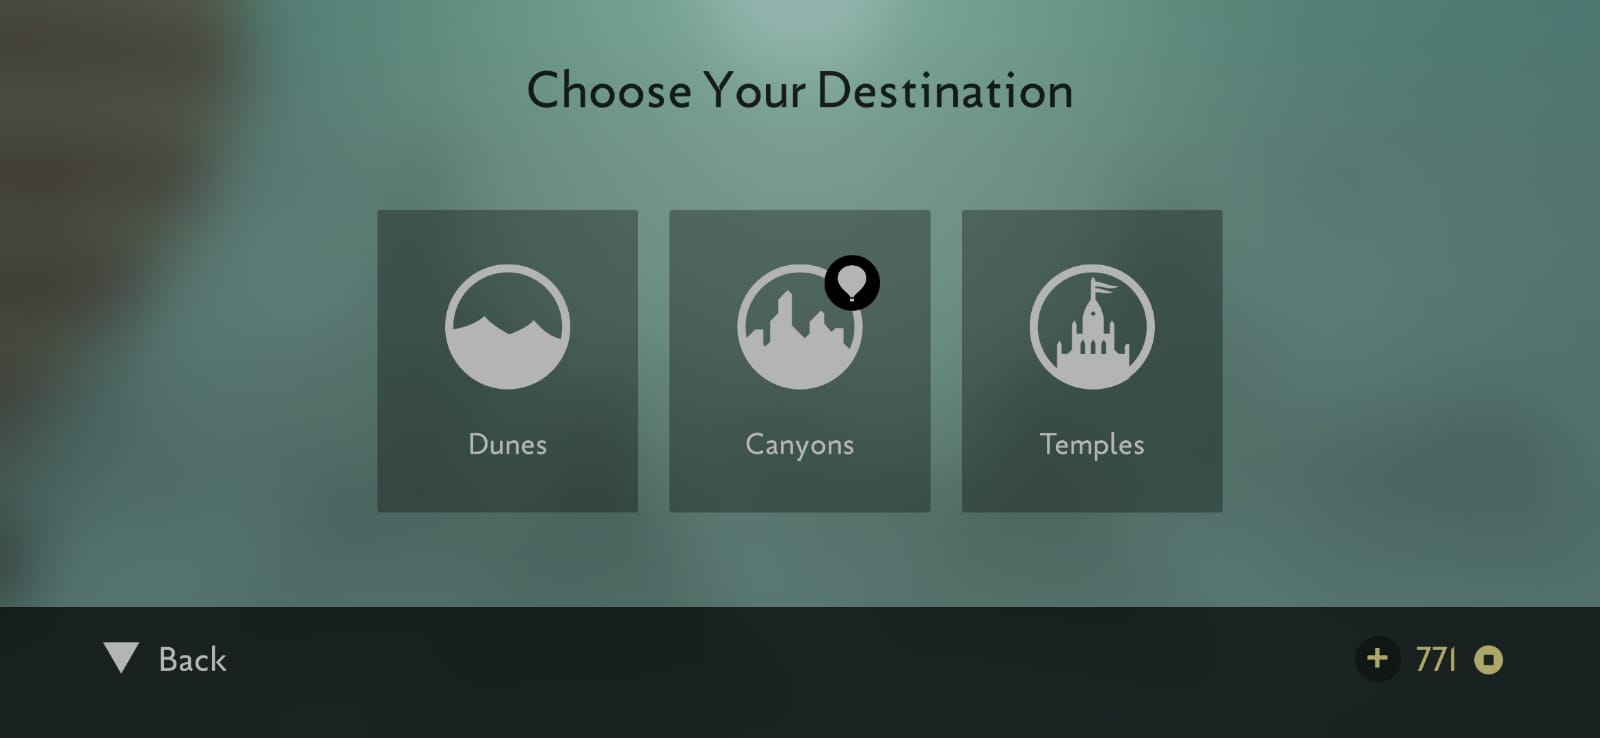 A menu in the game that lets you choose a destination